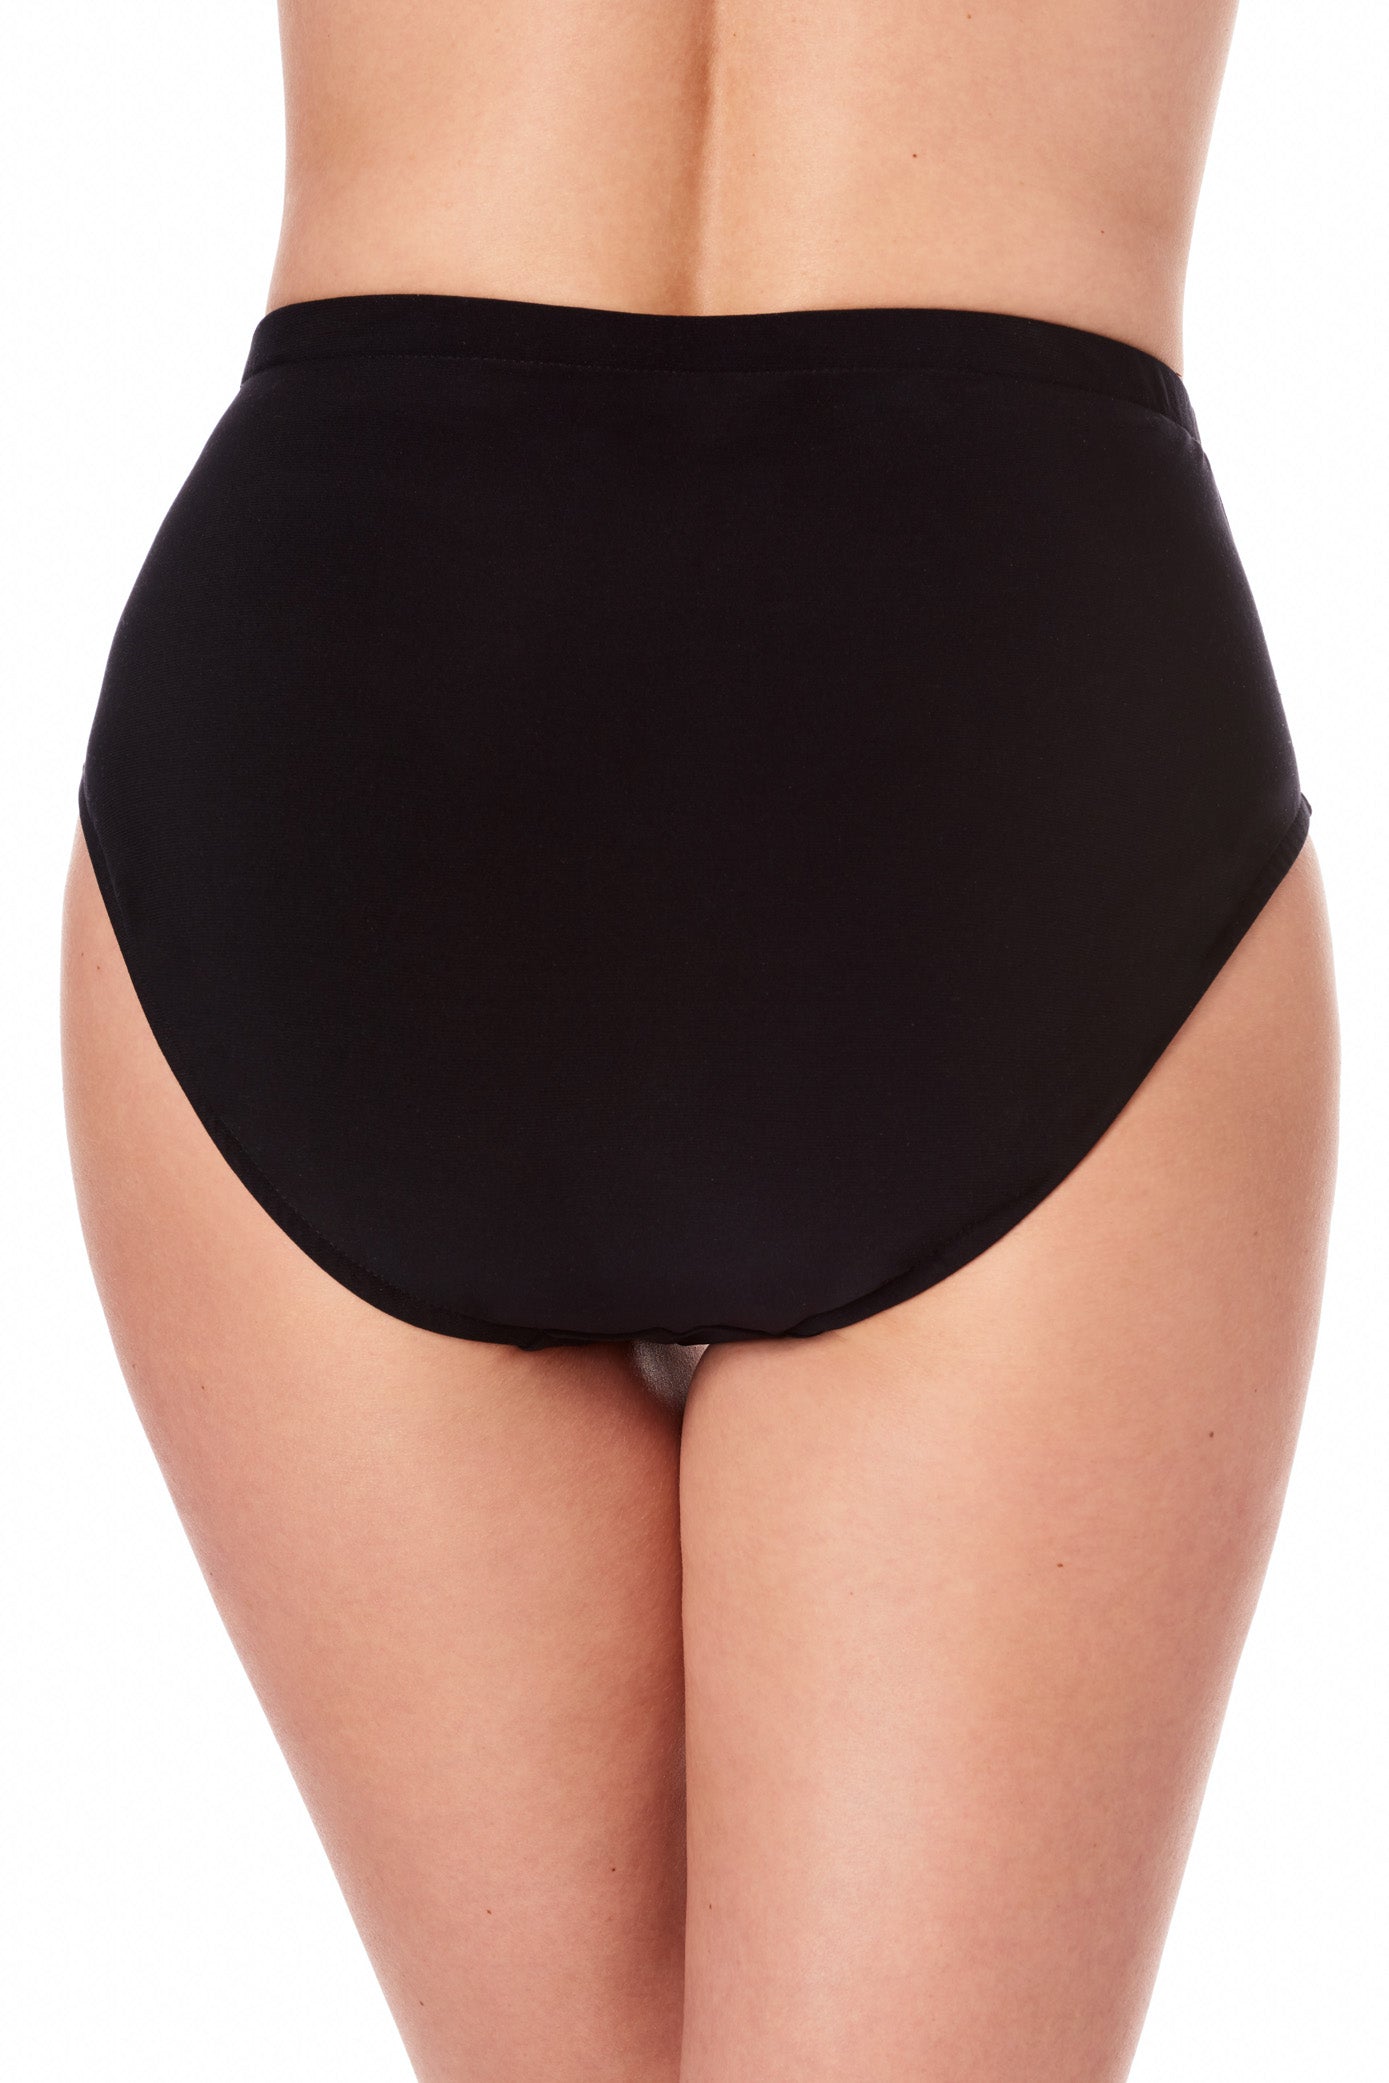 Swimwear sizing fits smaller than apparel sizing, order one size up for more coverage Designed for a classic fit Pull on Full coverage High rise Tops and bottoms sold separately Nylon/lycra Hand wash